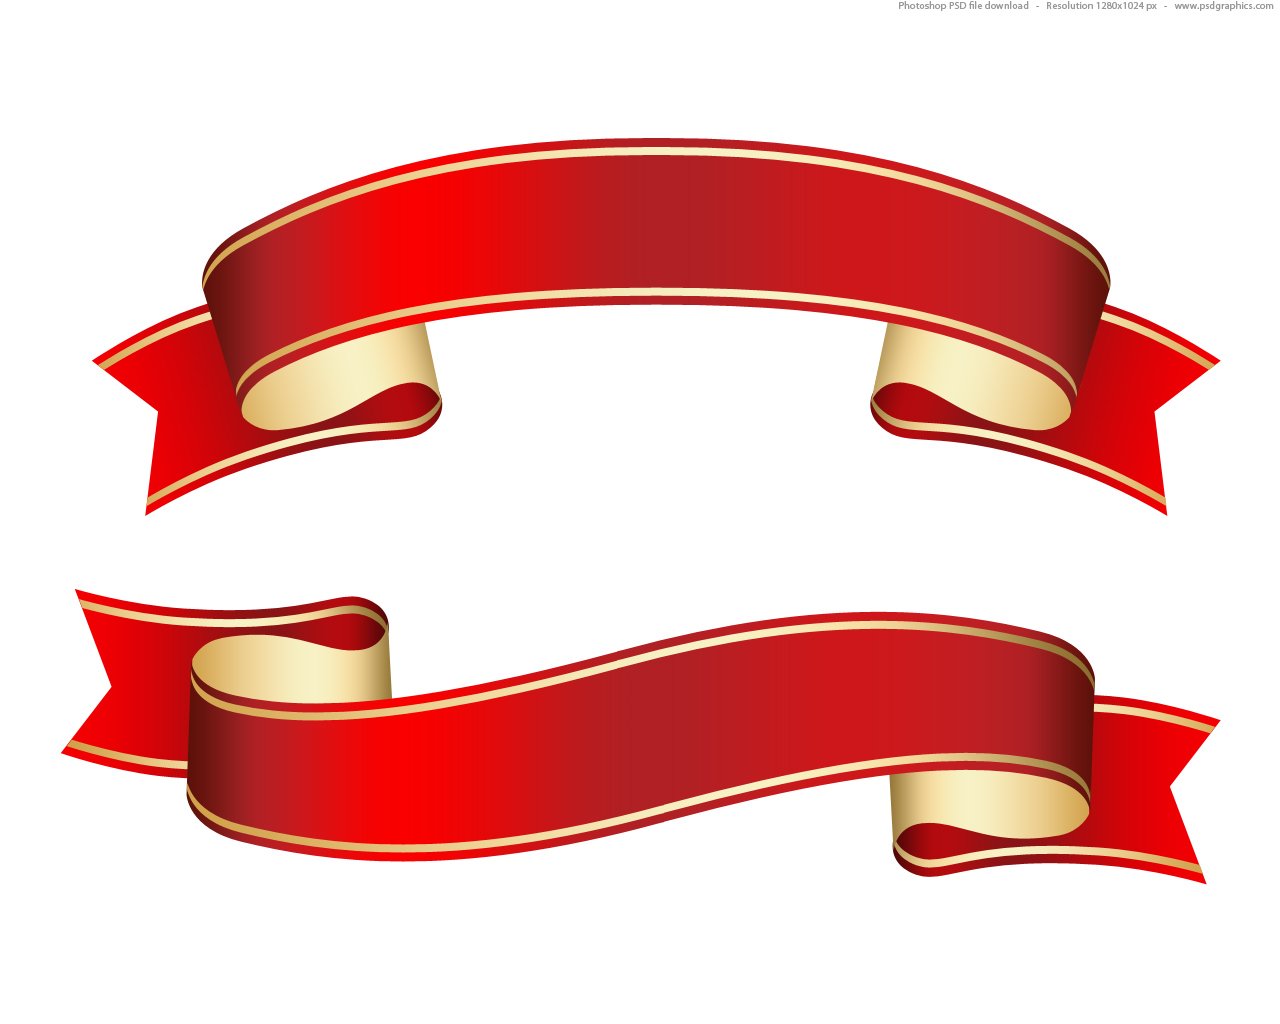 https://www.psdgraphics.com/file/curled-red-ribbon.jpg